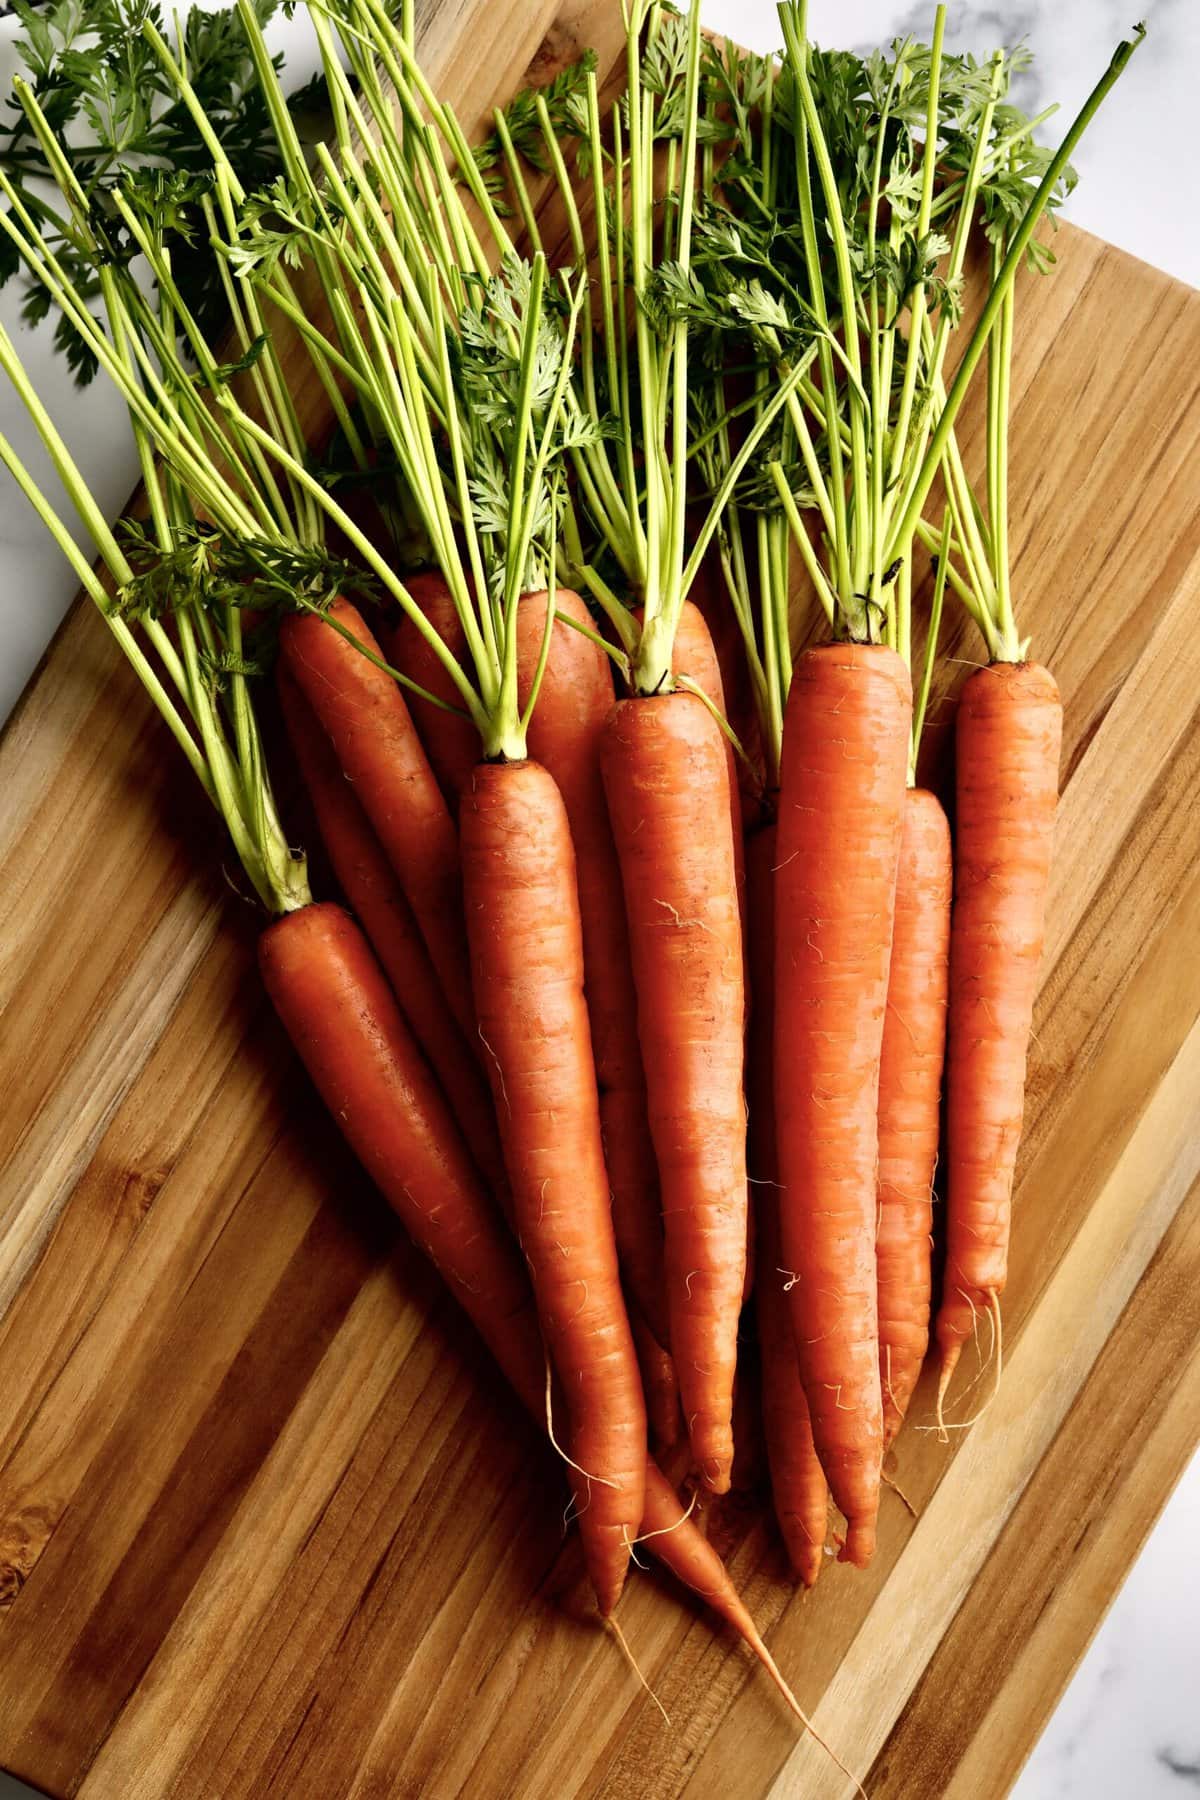 raw carrots with green stems on a cutting board.